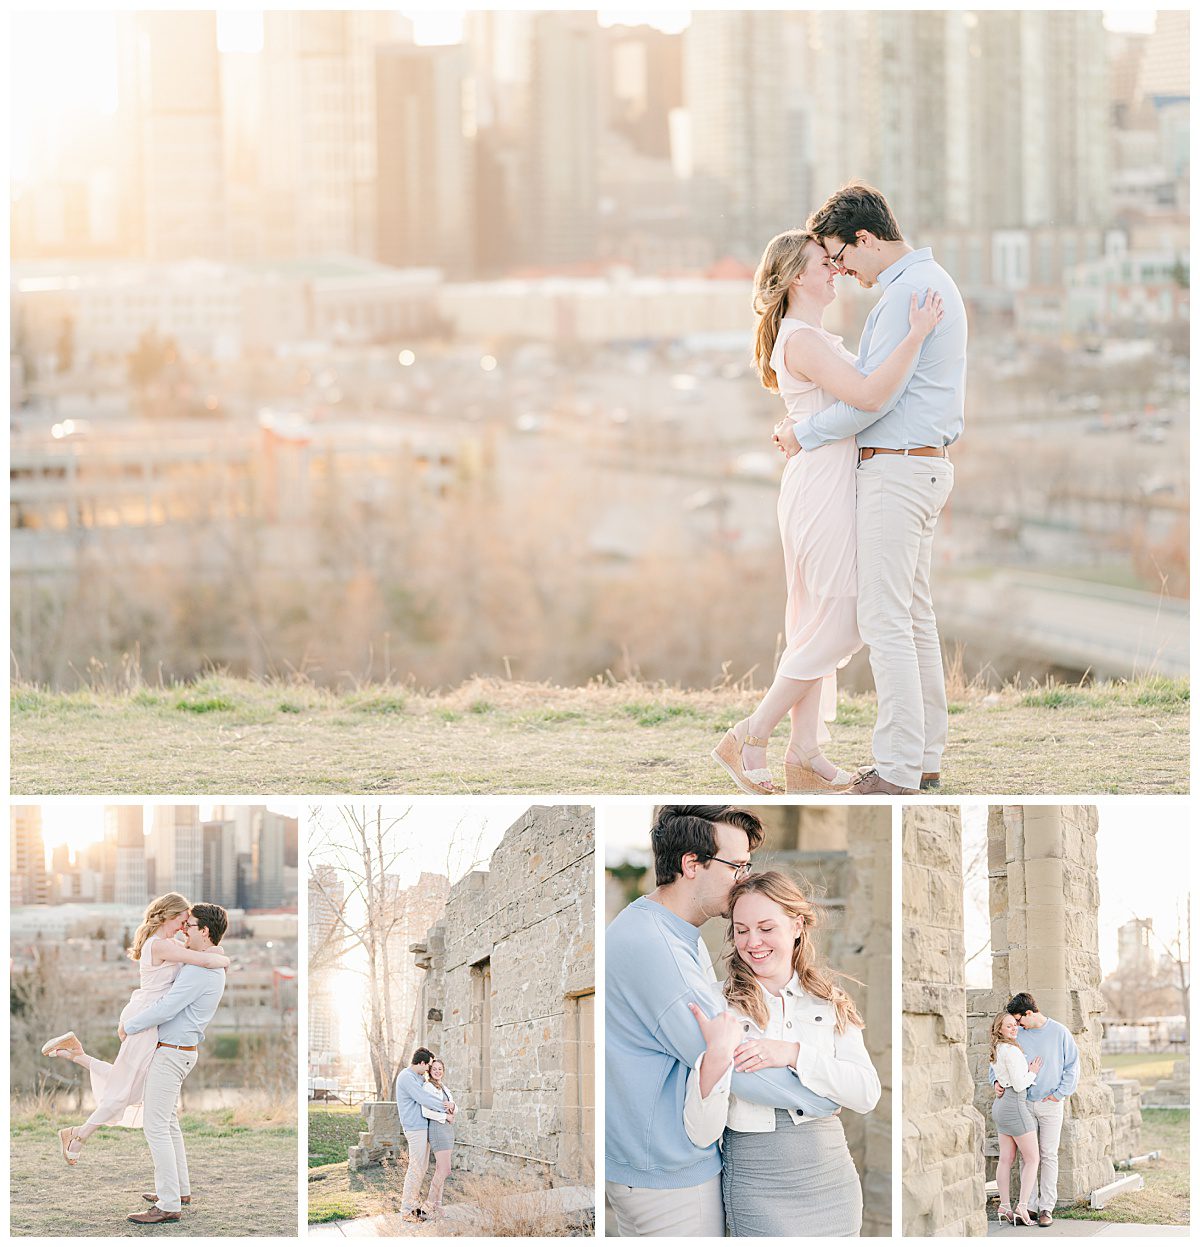 A Romantic Downtown Calgary Engagement Session